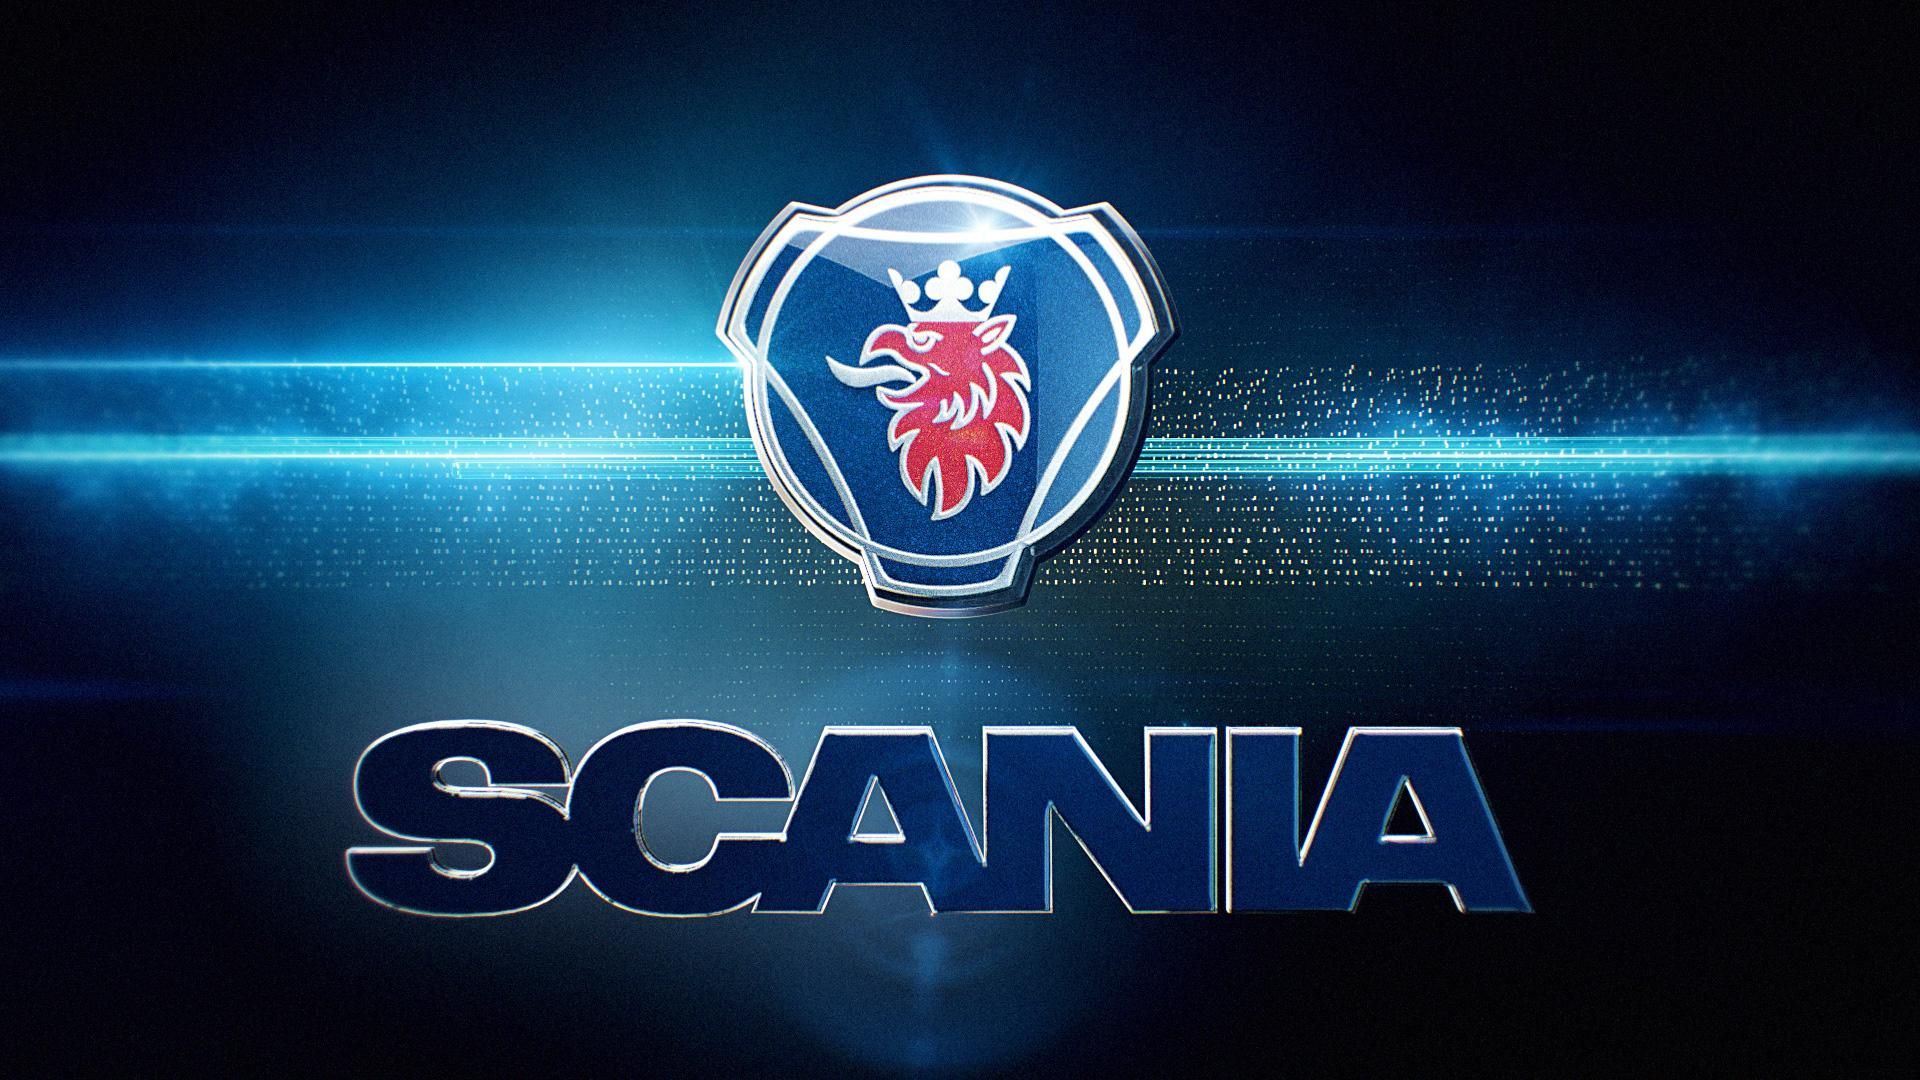 Scania Logo Wallpaper Wallpaper Scania Logo is free on Elsetge.cat. Please download and share this free wallpaper